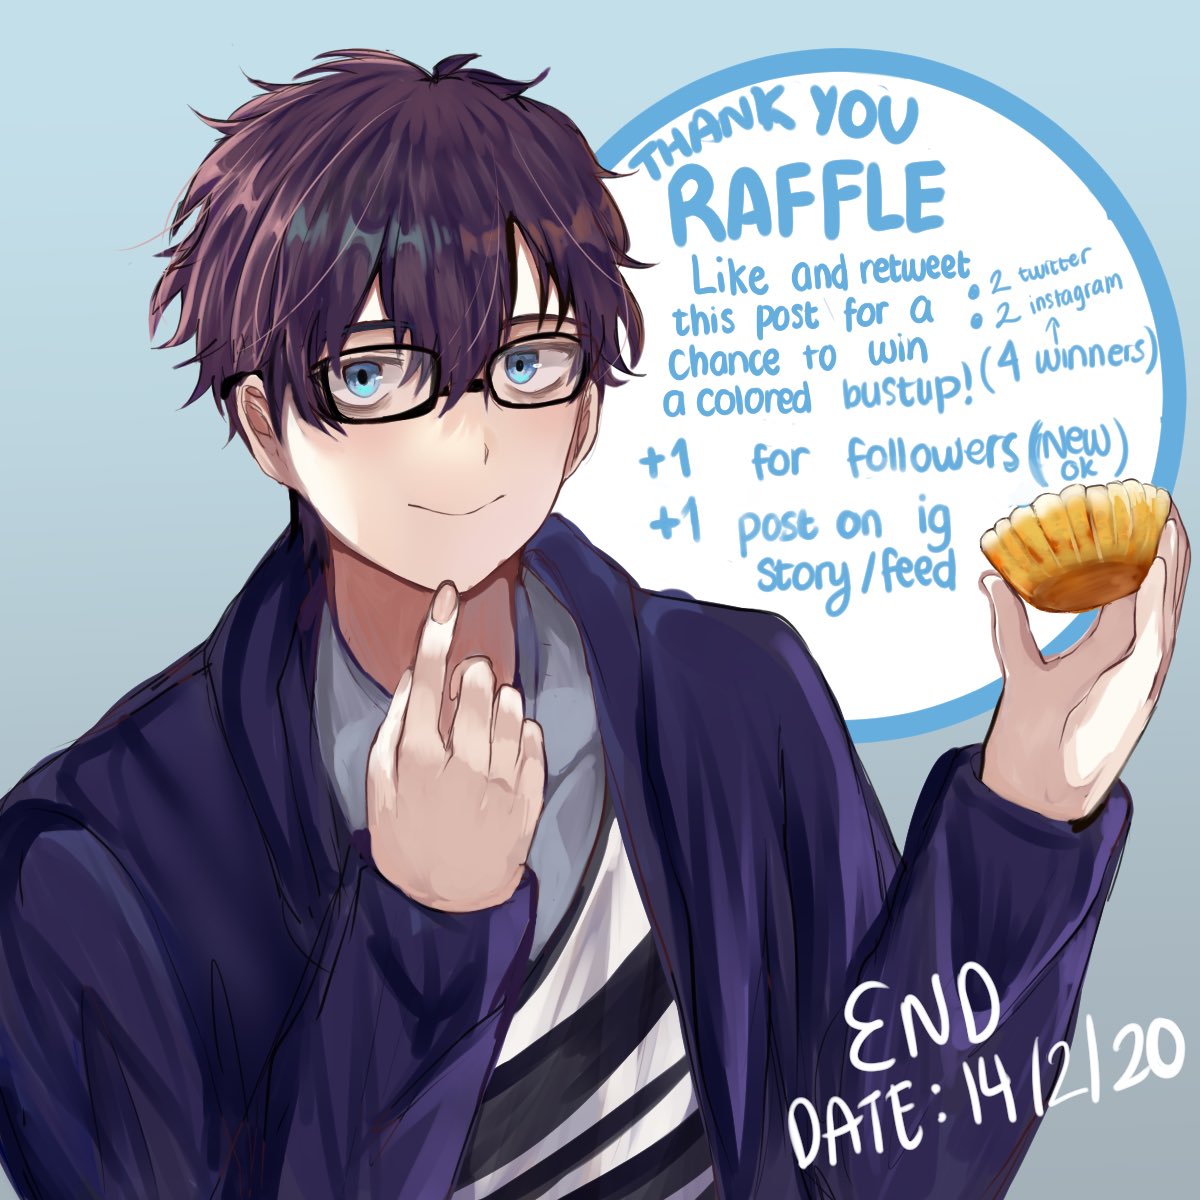 Hosting a raffle until 14 February 2020~  Just like and retweet the post to join~
There will be two winners on Instagram and two winners on Twitter!
Extra:
+1 number for following (New is OK!)
+1 number for posting on Instagram story/feed
+1 joining DTIYS (instagram only) 